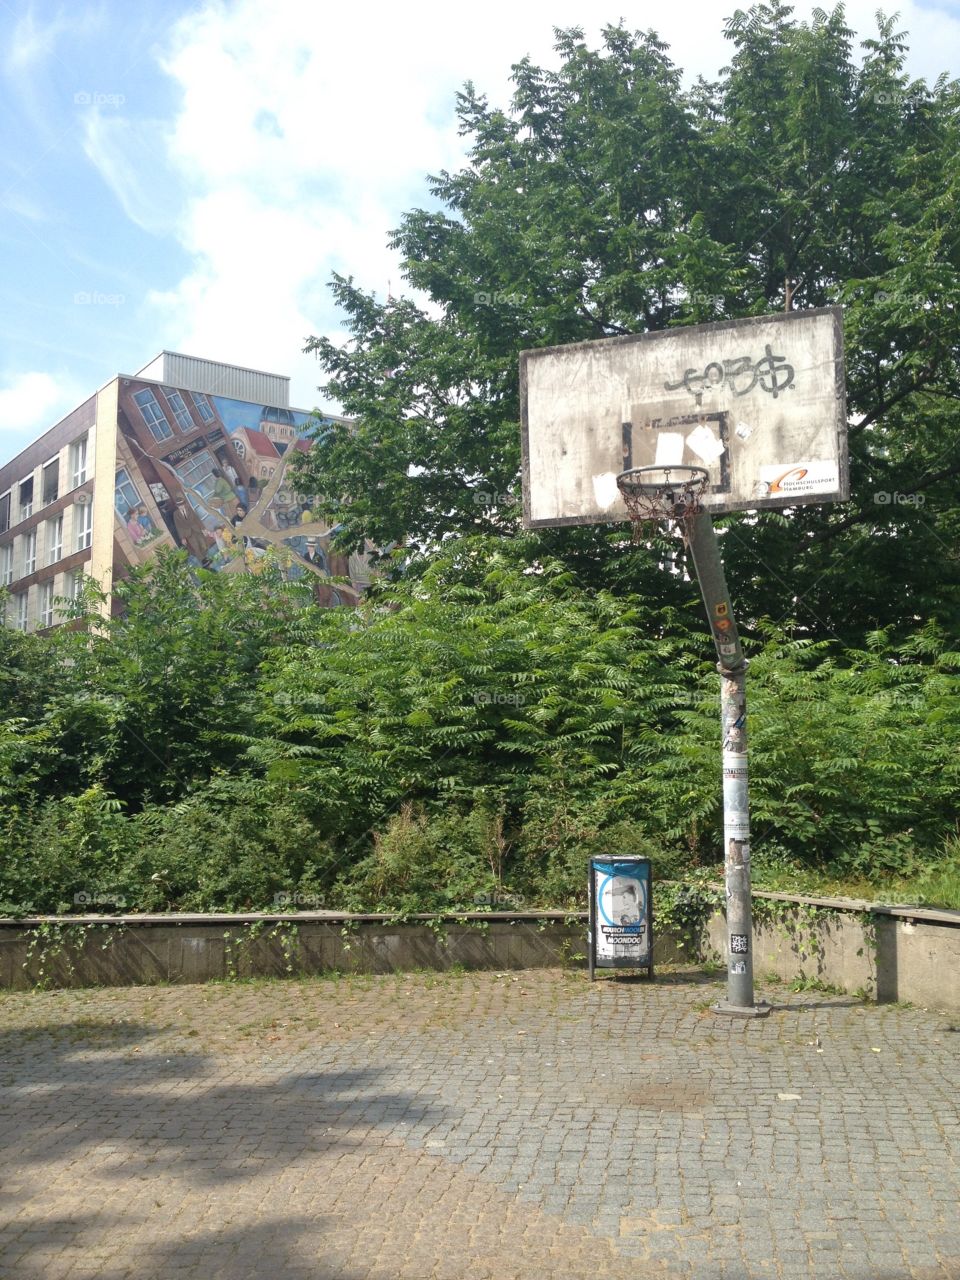 Basketball hoops outdoors in an university campus 